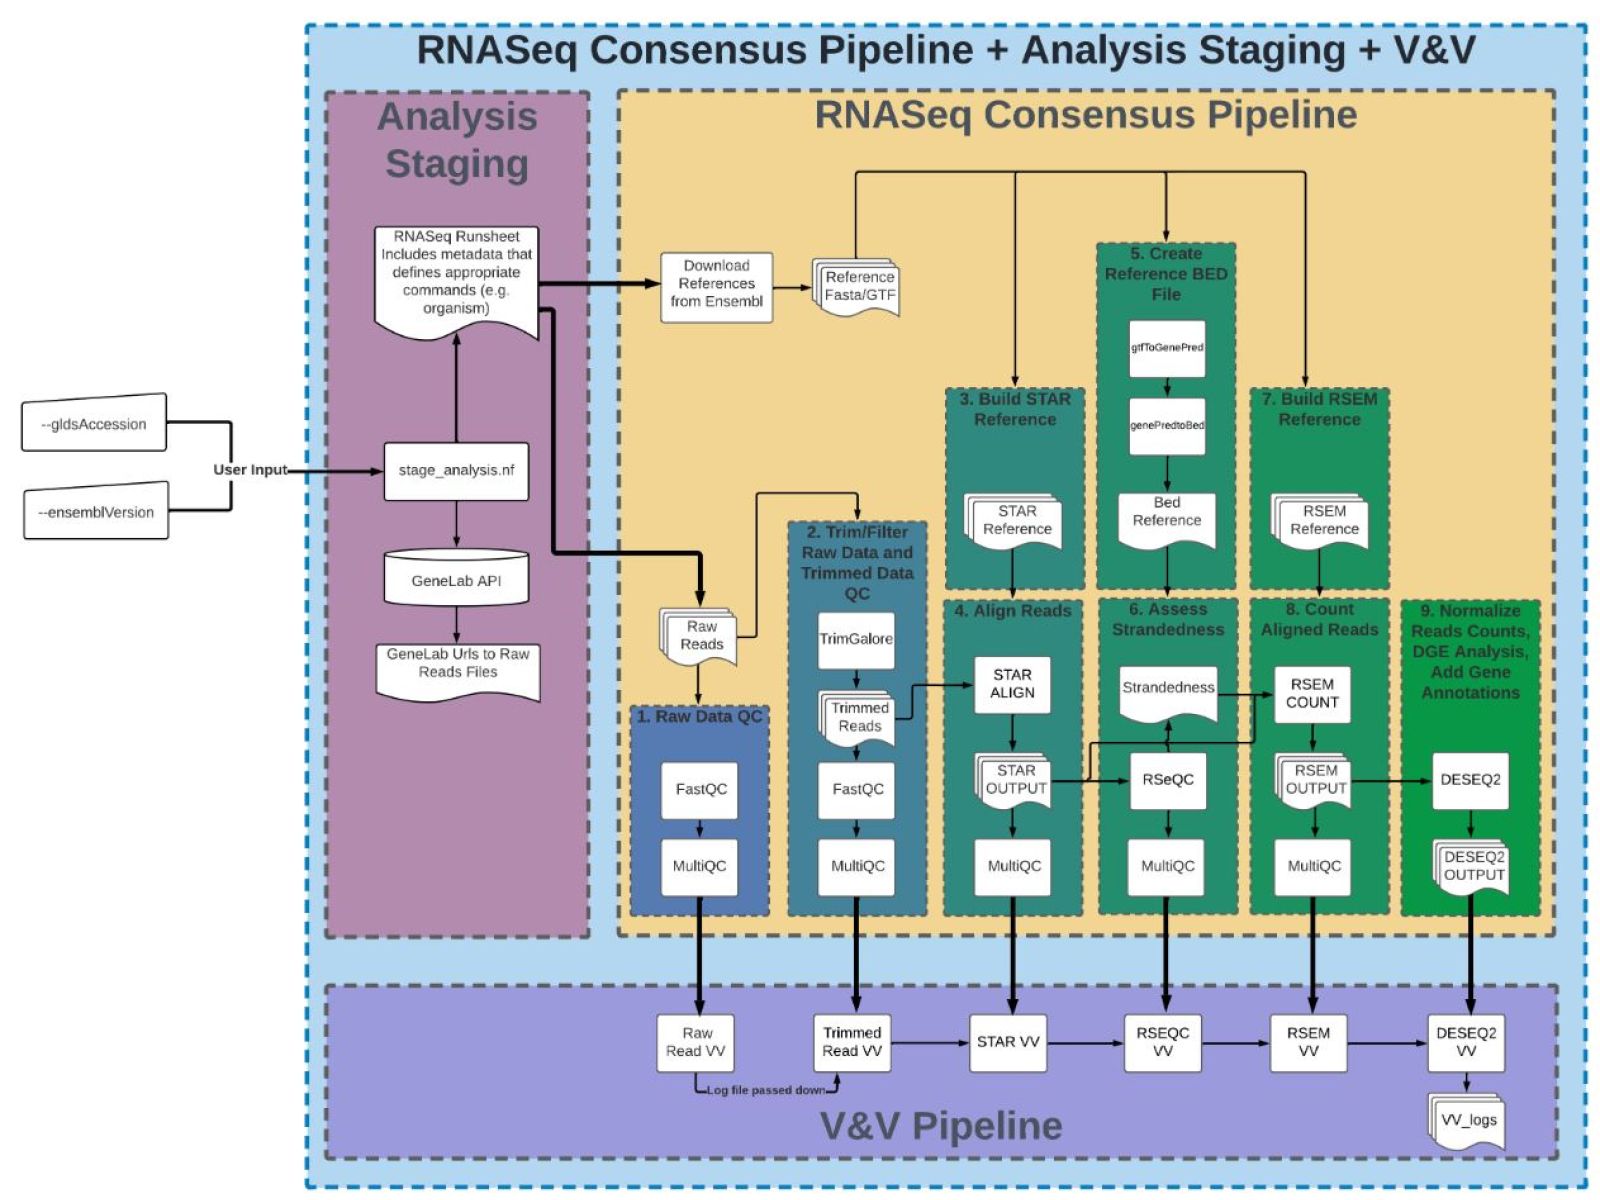 Image displaying how the components of the RNAseq workflow are wrapped into Nextflow